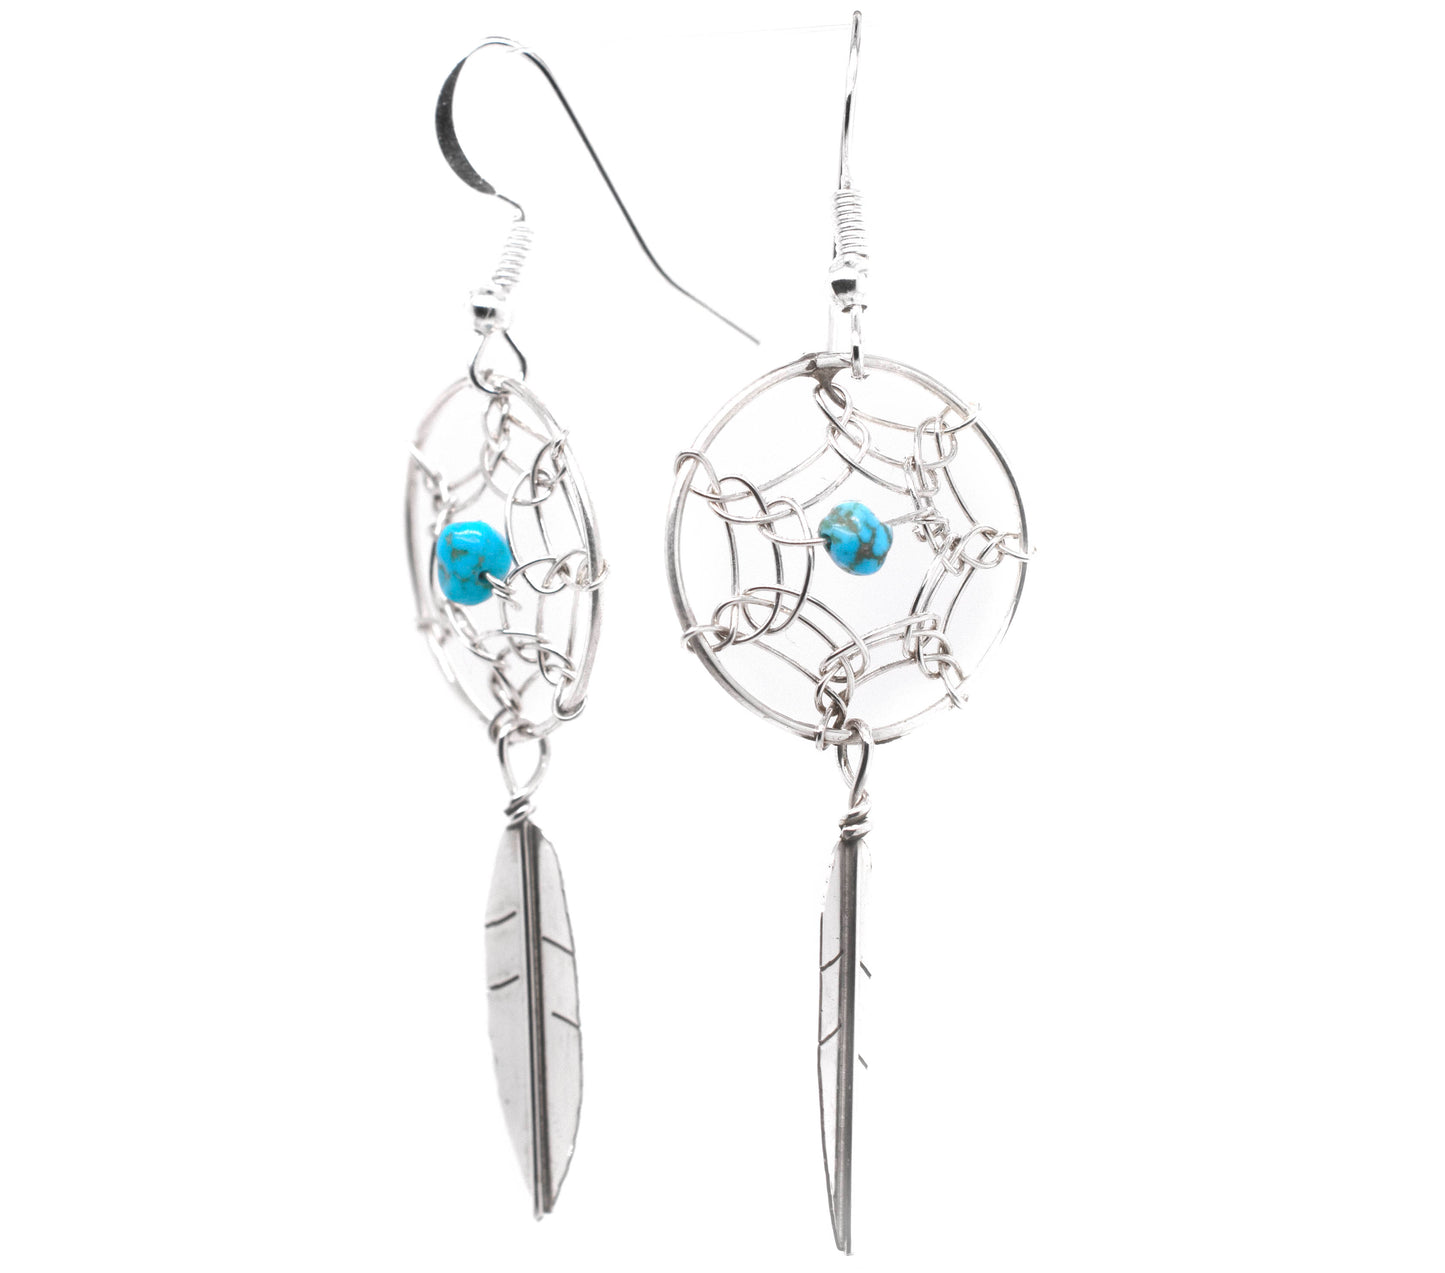 A pair of Super Silver Zuni Dreamcatcher Earrings with Natural Stone Bead.